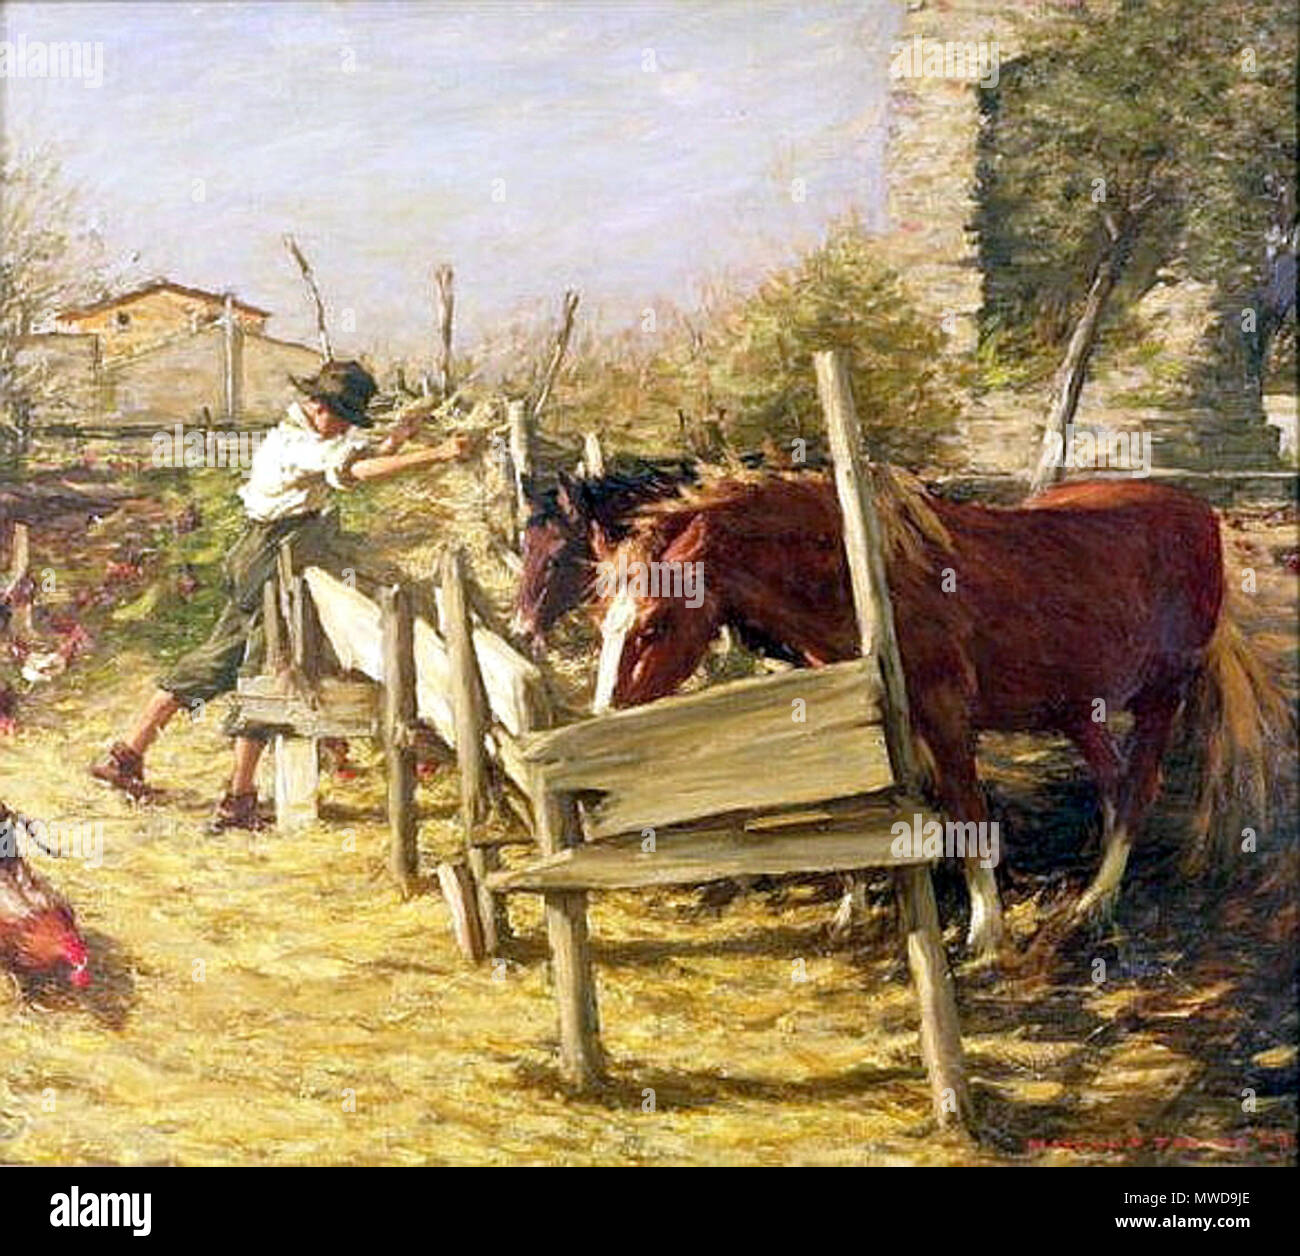 . The Appian Way . Unknown date.    Henry Herbert La Thangue  (1859–1929)     Alternative names Henry Herbert LaThangue; Henry La Thangue; Henry Herbert la Thangue; Henry Herbert Lathangue; La Thangue  Description English painter Realist painter and associated with the Newlyn School  Date of birth/death 19 September 1859 21 December 1929  Location of birth/death London London  Work location Bretagne, London, Category:Norfolk  Authority control  : Q1606851 VIAF: 25469415 ISNI: 0000 0000 6681 1384 ULAN: 500004645 LCCN: n89654016 WGA: LA THANGUE, Henry Herbert WorldCat 273 Henry Herbert La Thangu Stock Photo